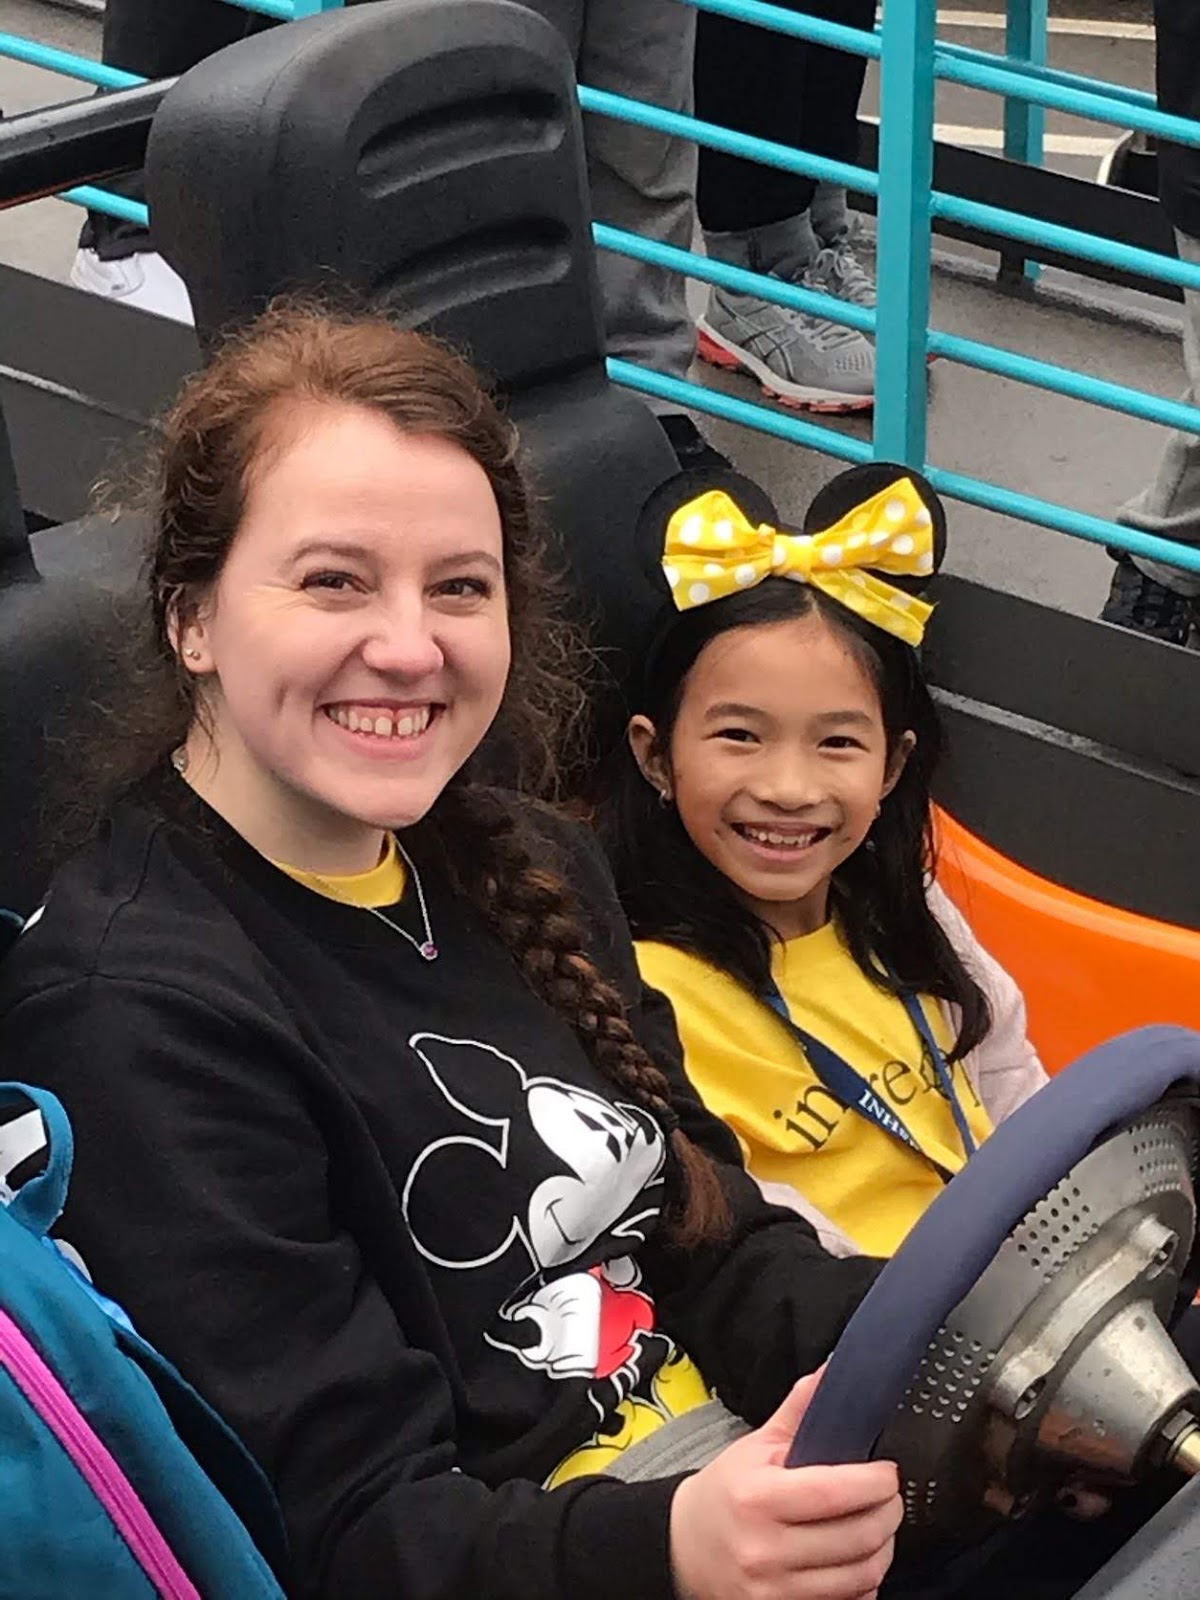 Madison Fuegan (l) attended the New York Legacy Retreat® with her family in 2015, but this South Dakota native chose to make Orlando her first destination as a volunteer!